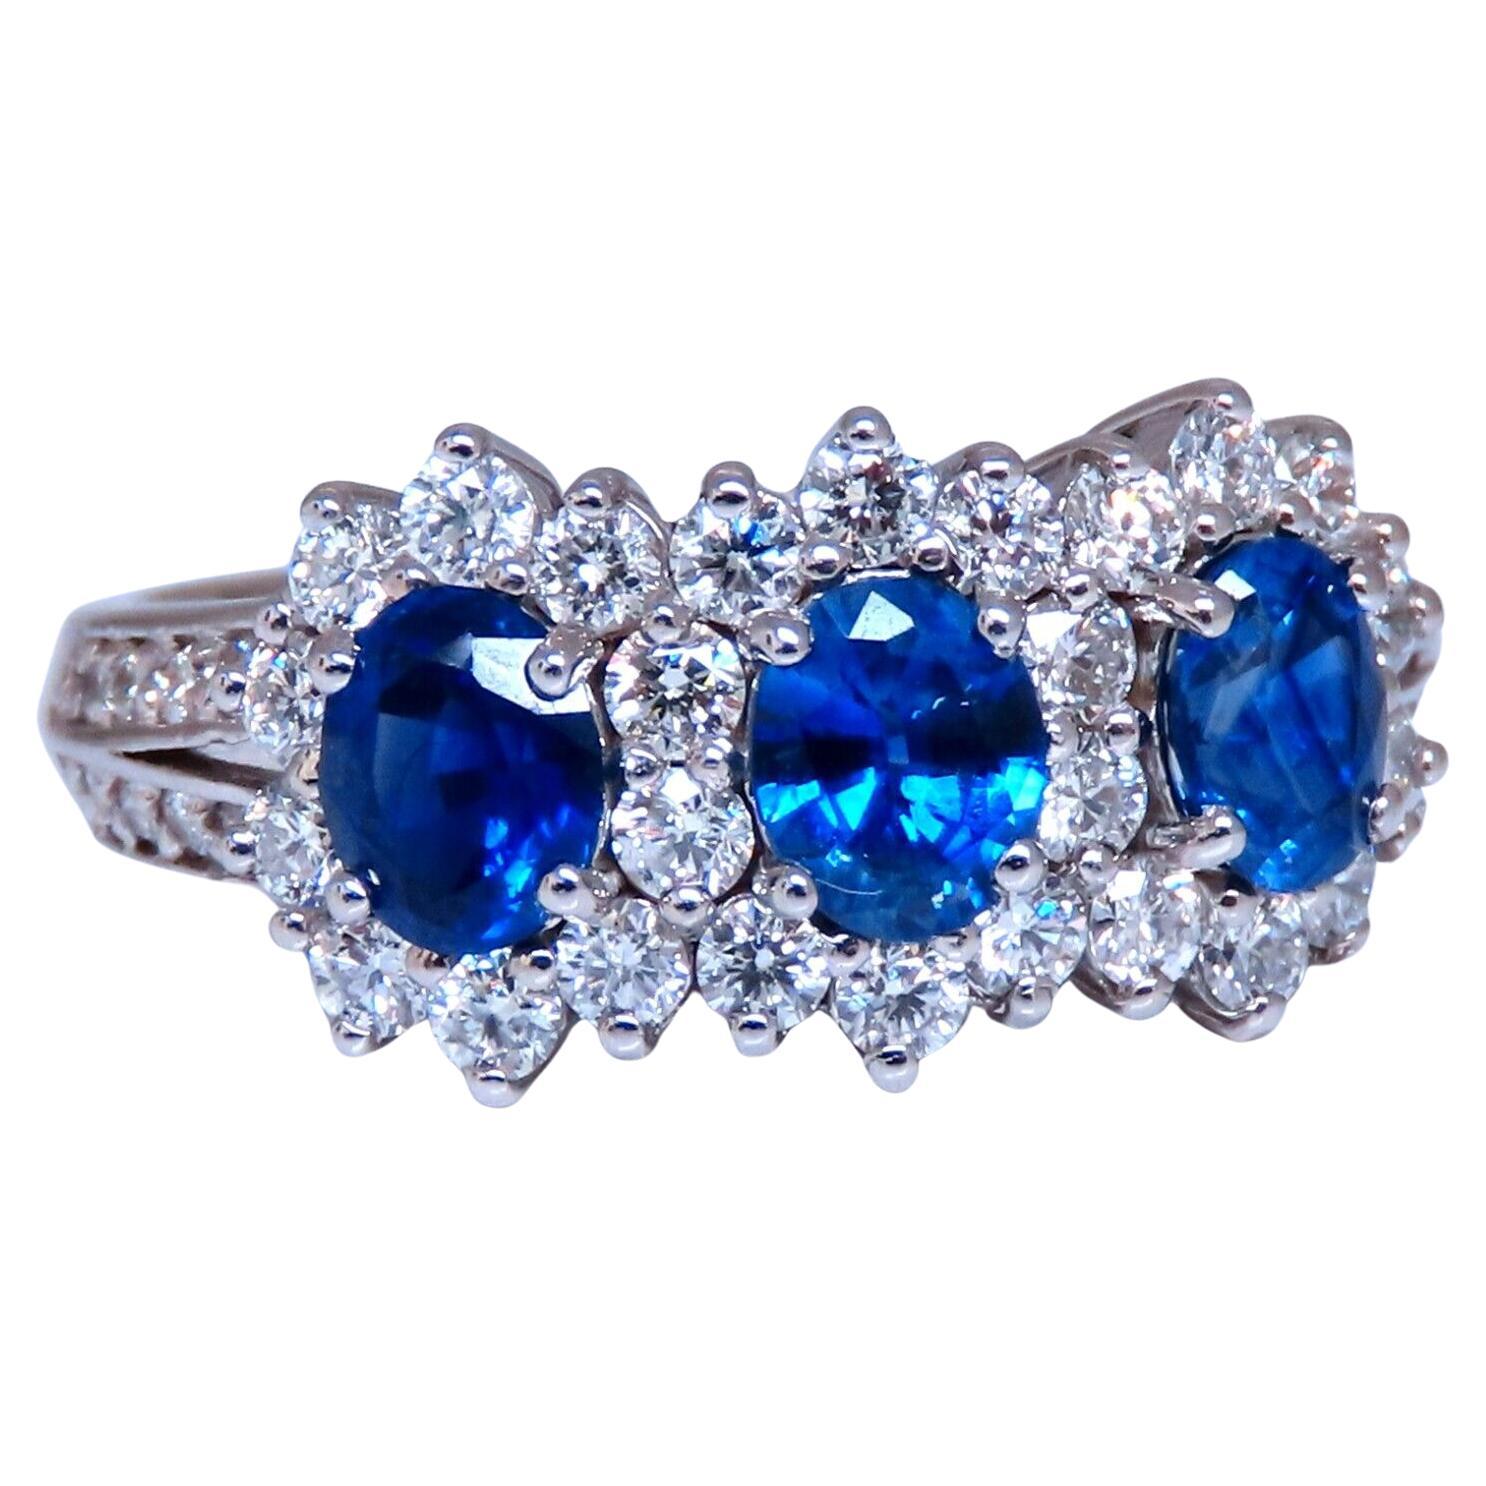 1.25ct Natural Sapphires Diamonds Ring 14kt Gold Three stone style For Sale